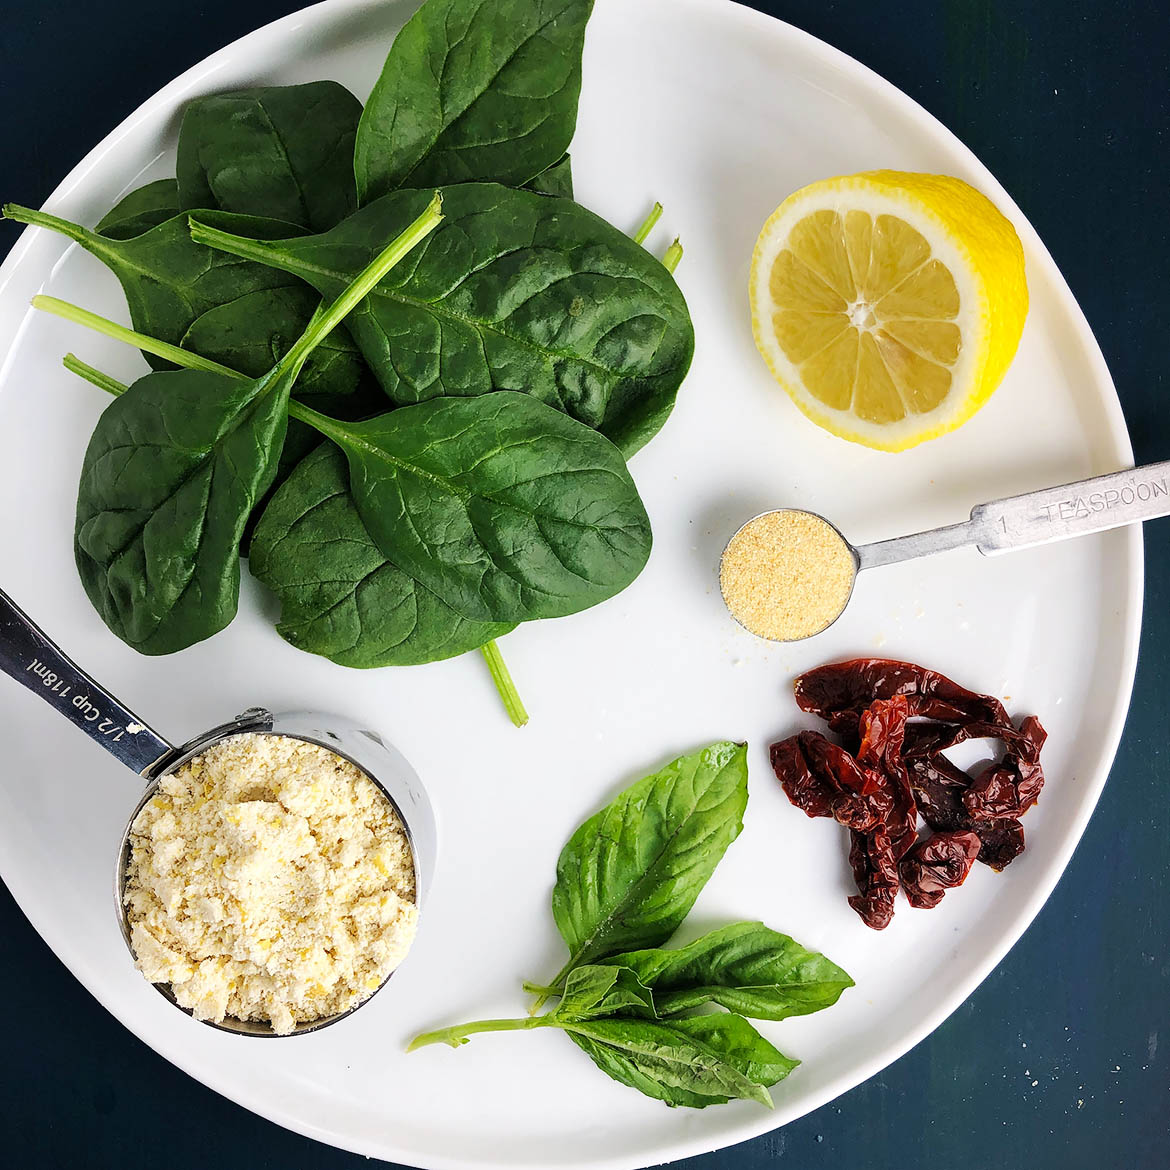 Top-down view of Hot Spinach Dip ingredients on a white plate: spinach, lemon, garlic powder, sun-dried tomatoes, basil, Mother Mix